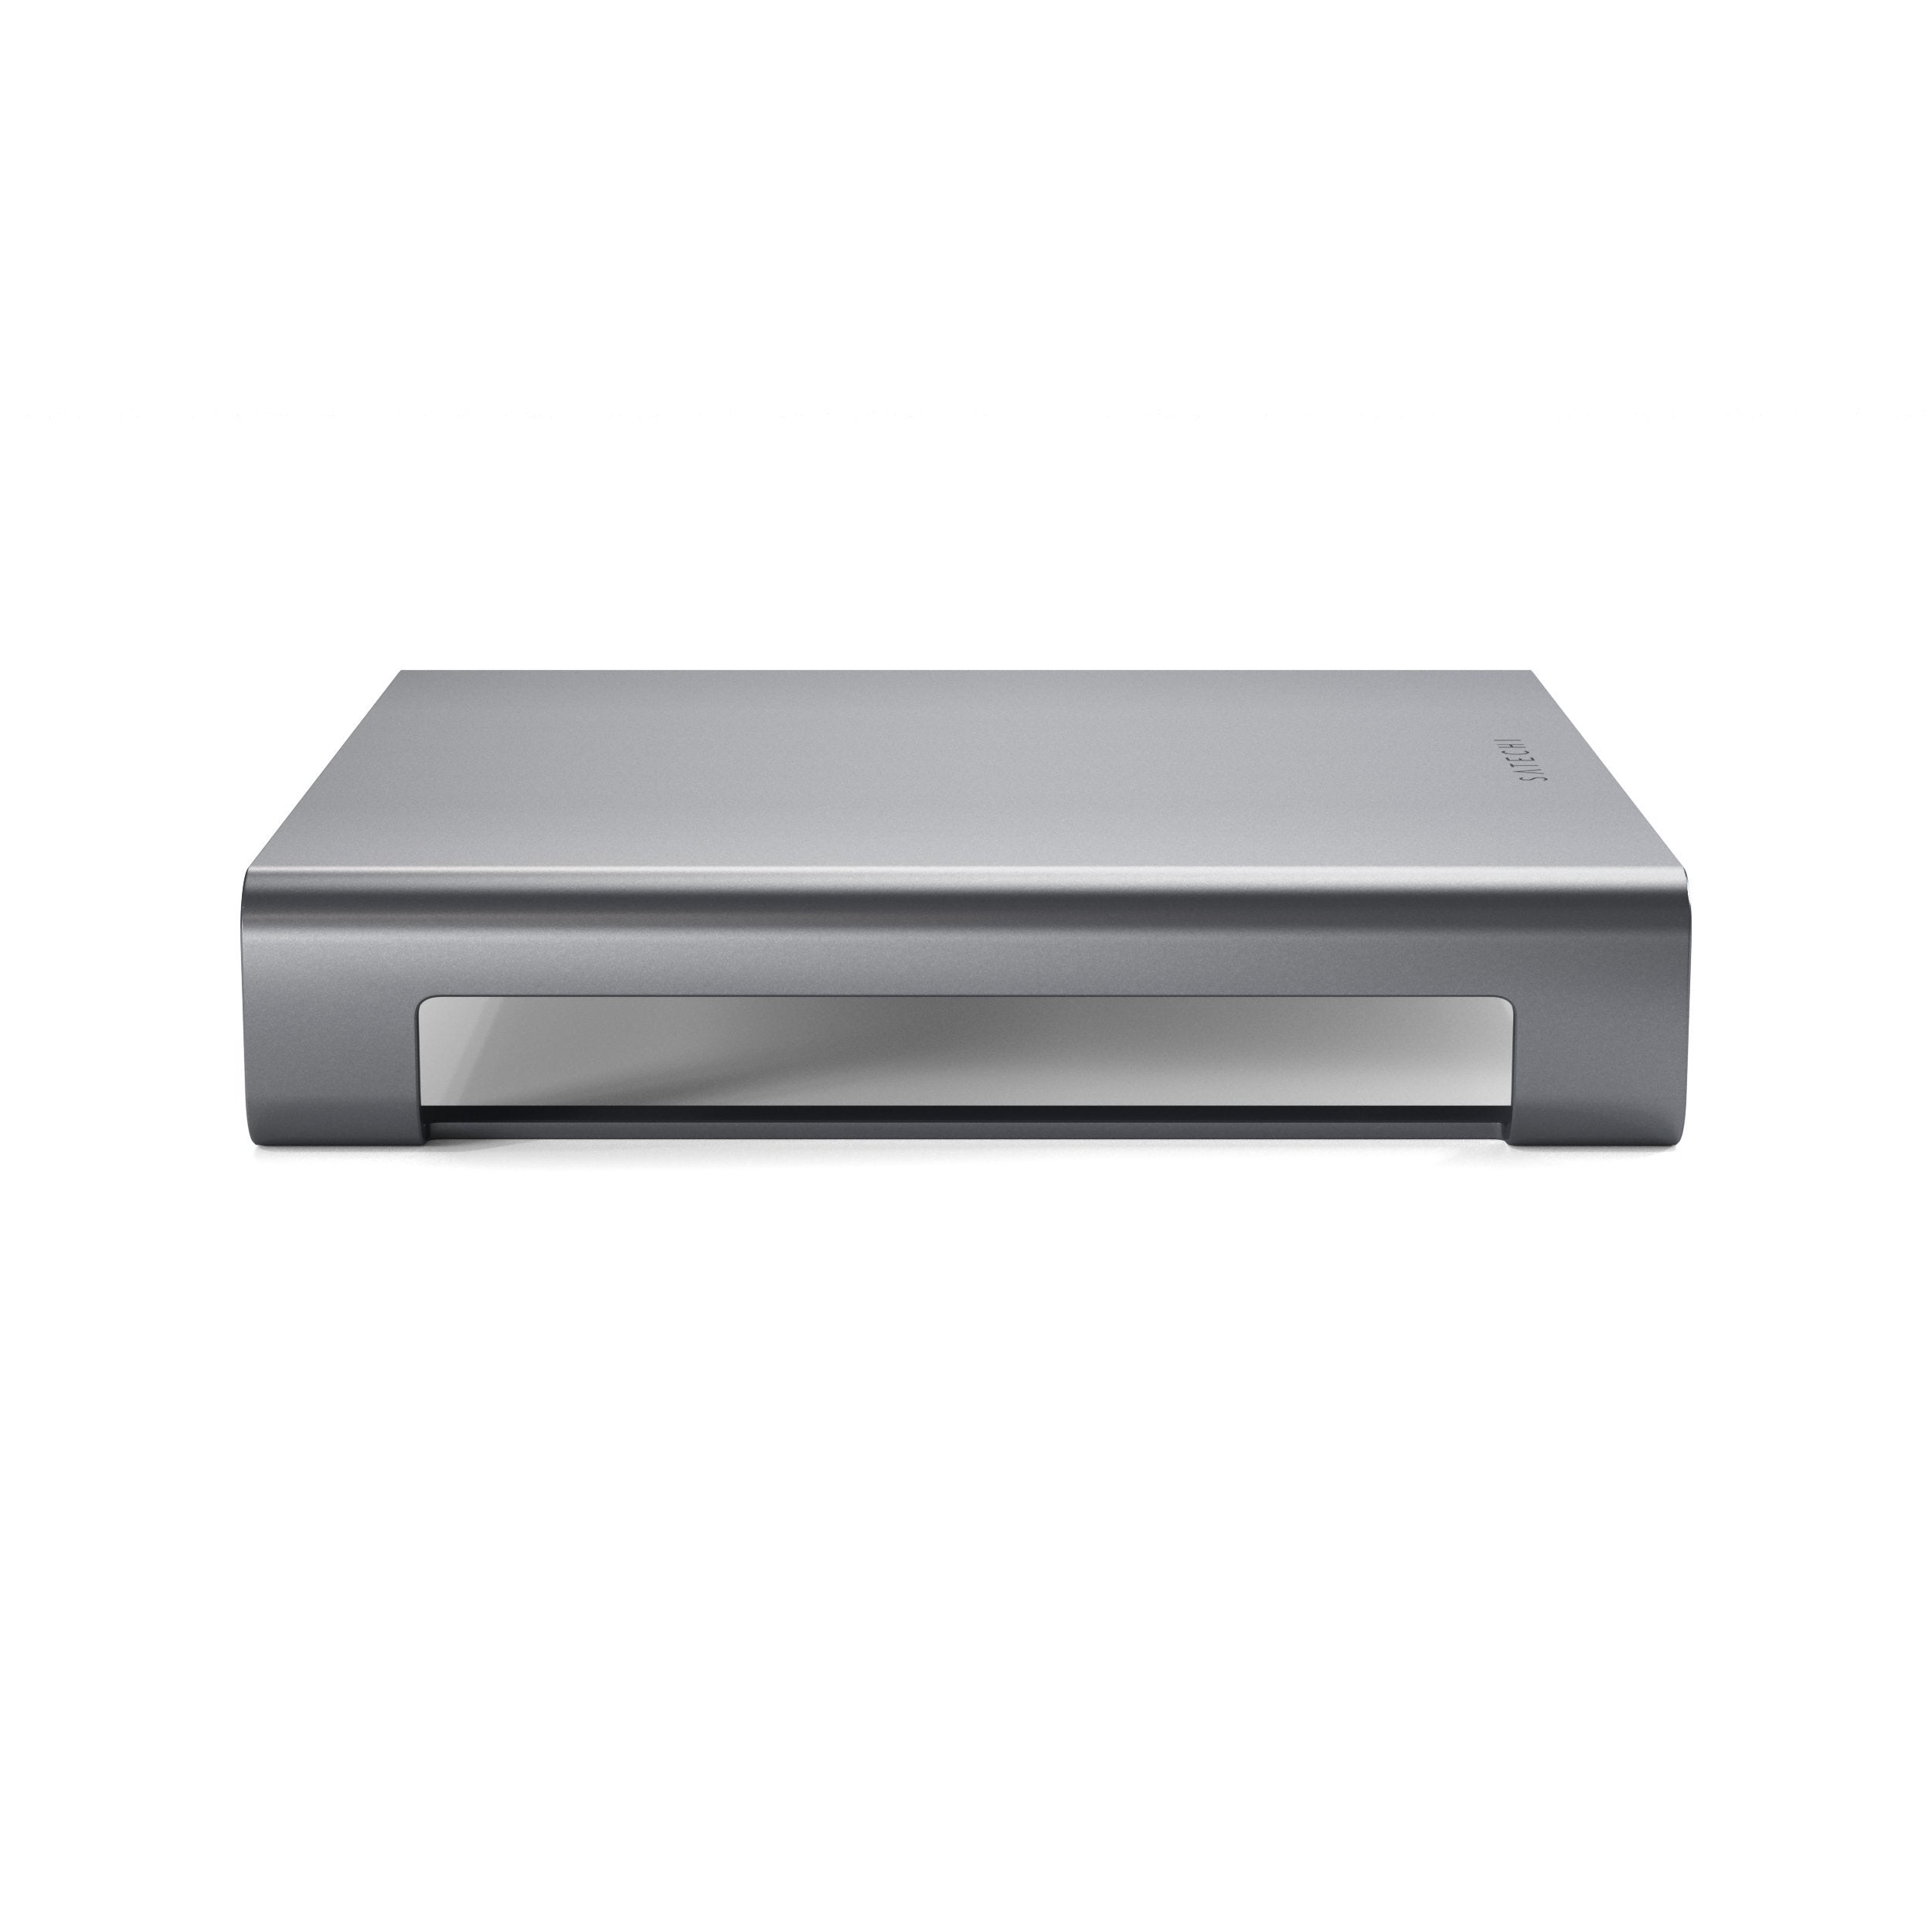 Satechi USB-C Aluminium Monitor Stand Hub for iMac (Space Grey) The Satechi Type-C Aluminium Monitor Stand Hub for iMac is your perfect 2-in-1 solution to enhance and elevate your desk space. Featuring built-in USB 3.0 ports, USB-C data port, micro/SD car